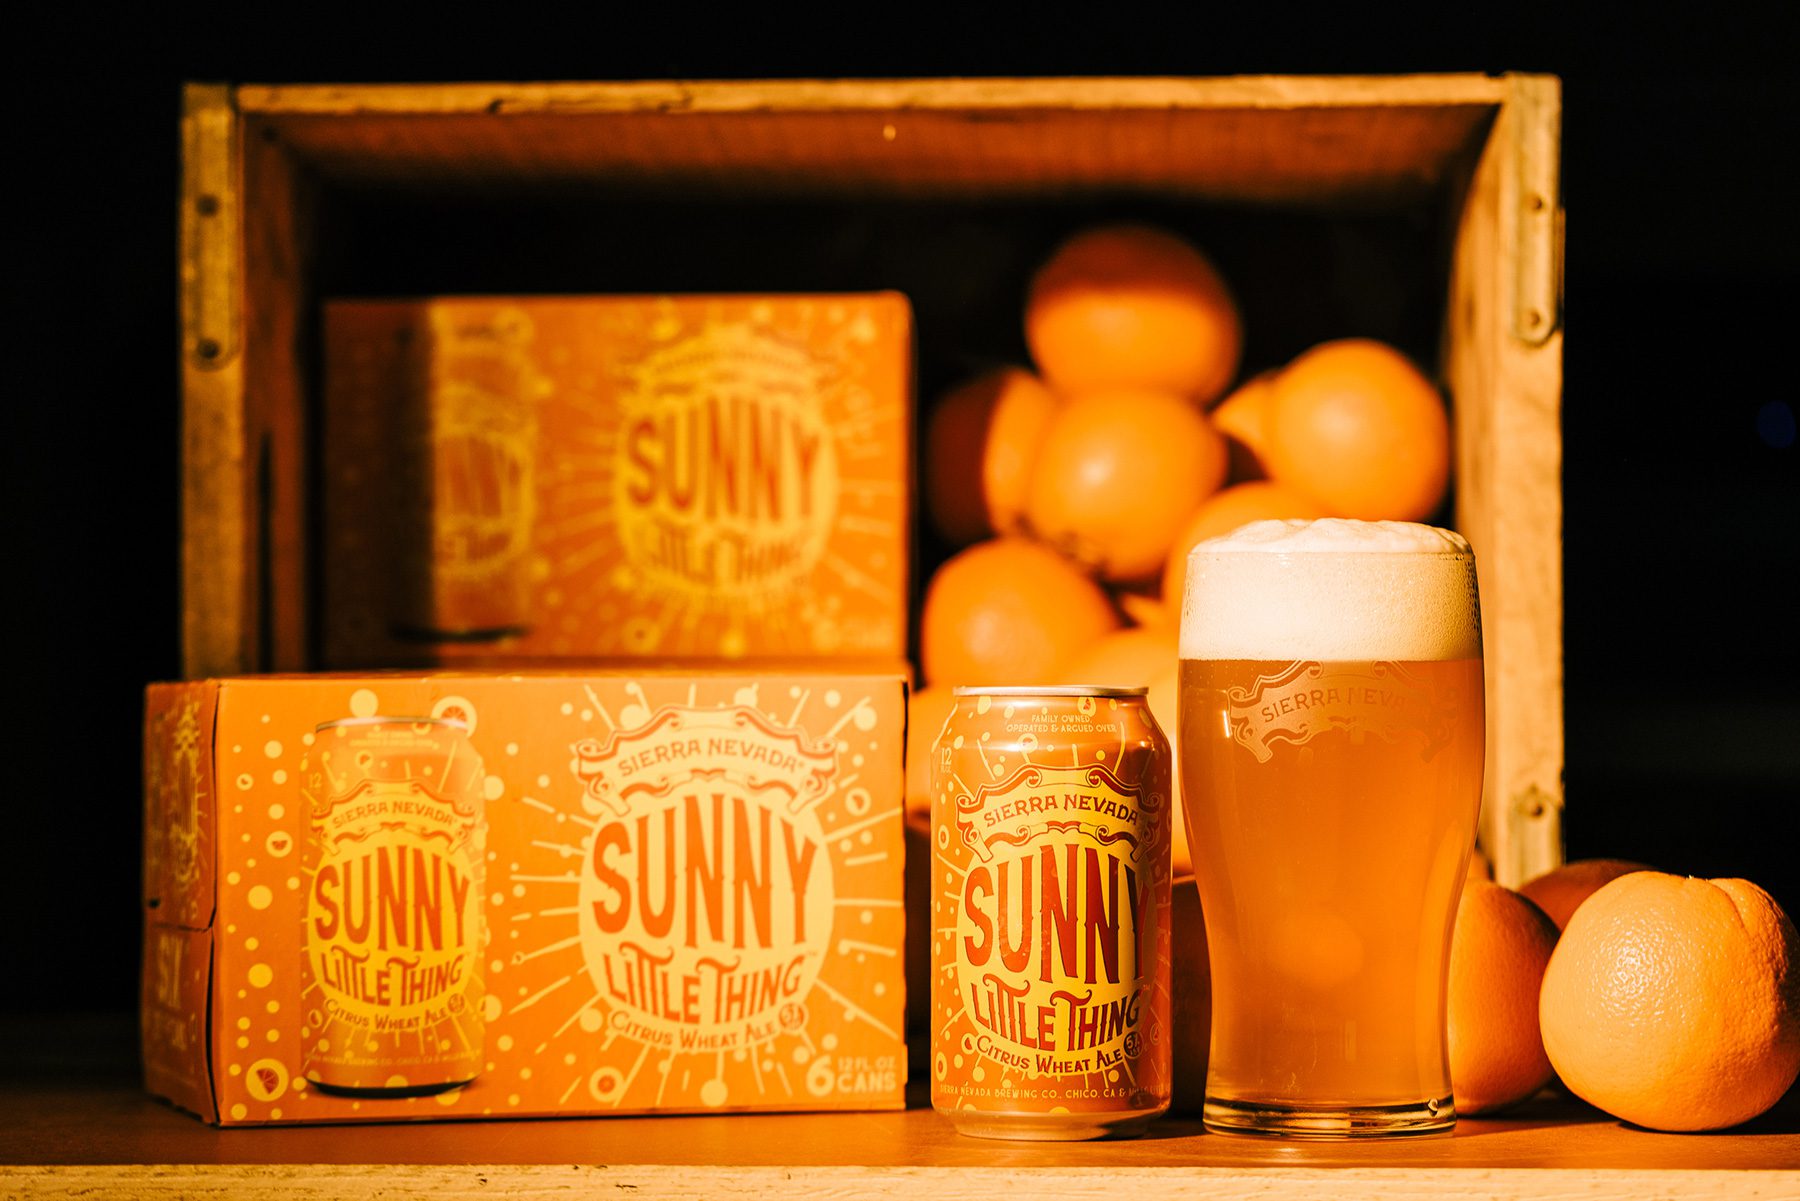 A can and full glass of Sunny Little Thing in front of a crate of oranges